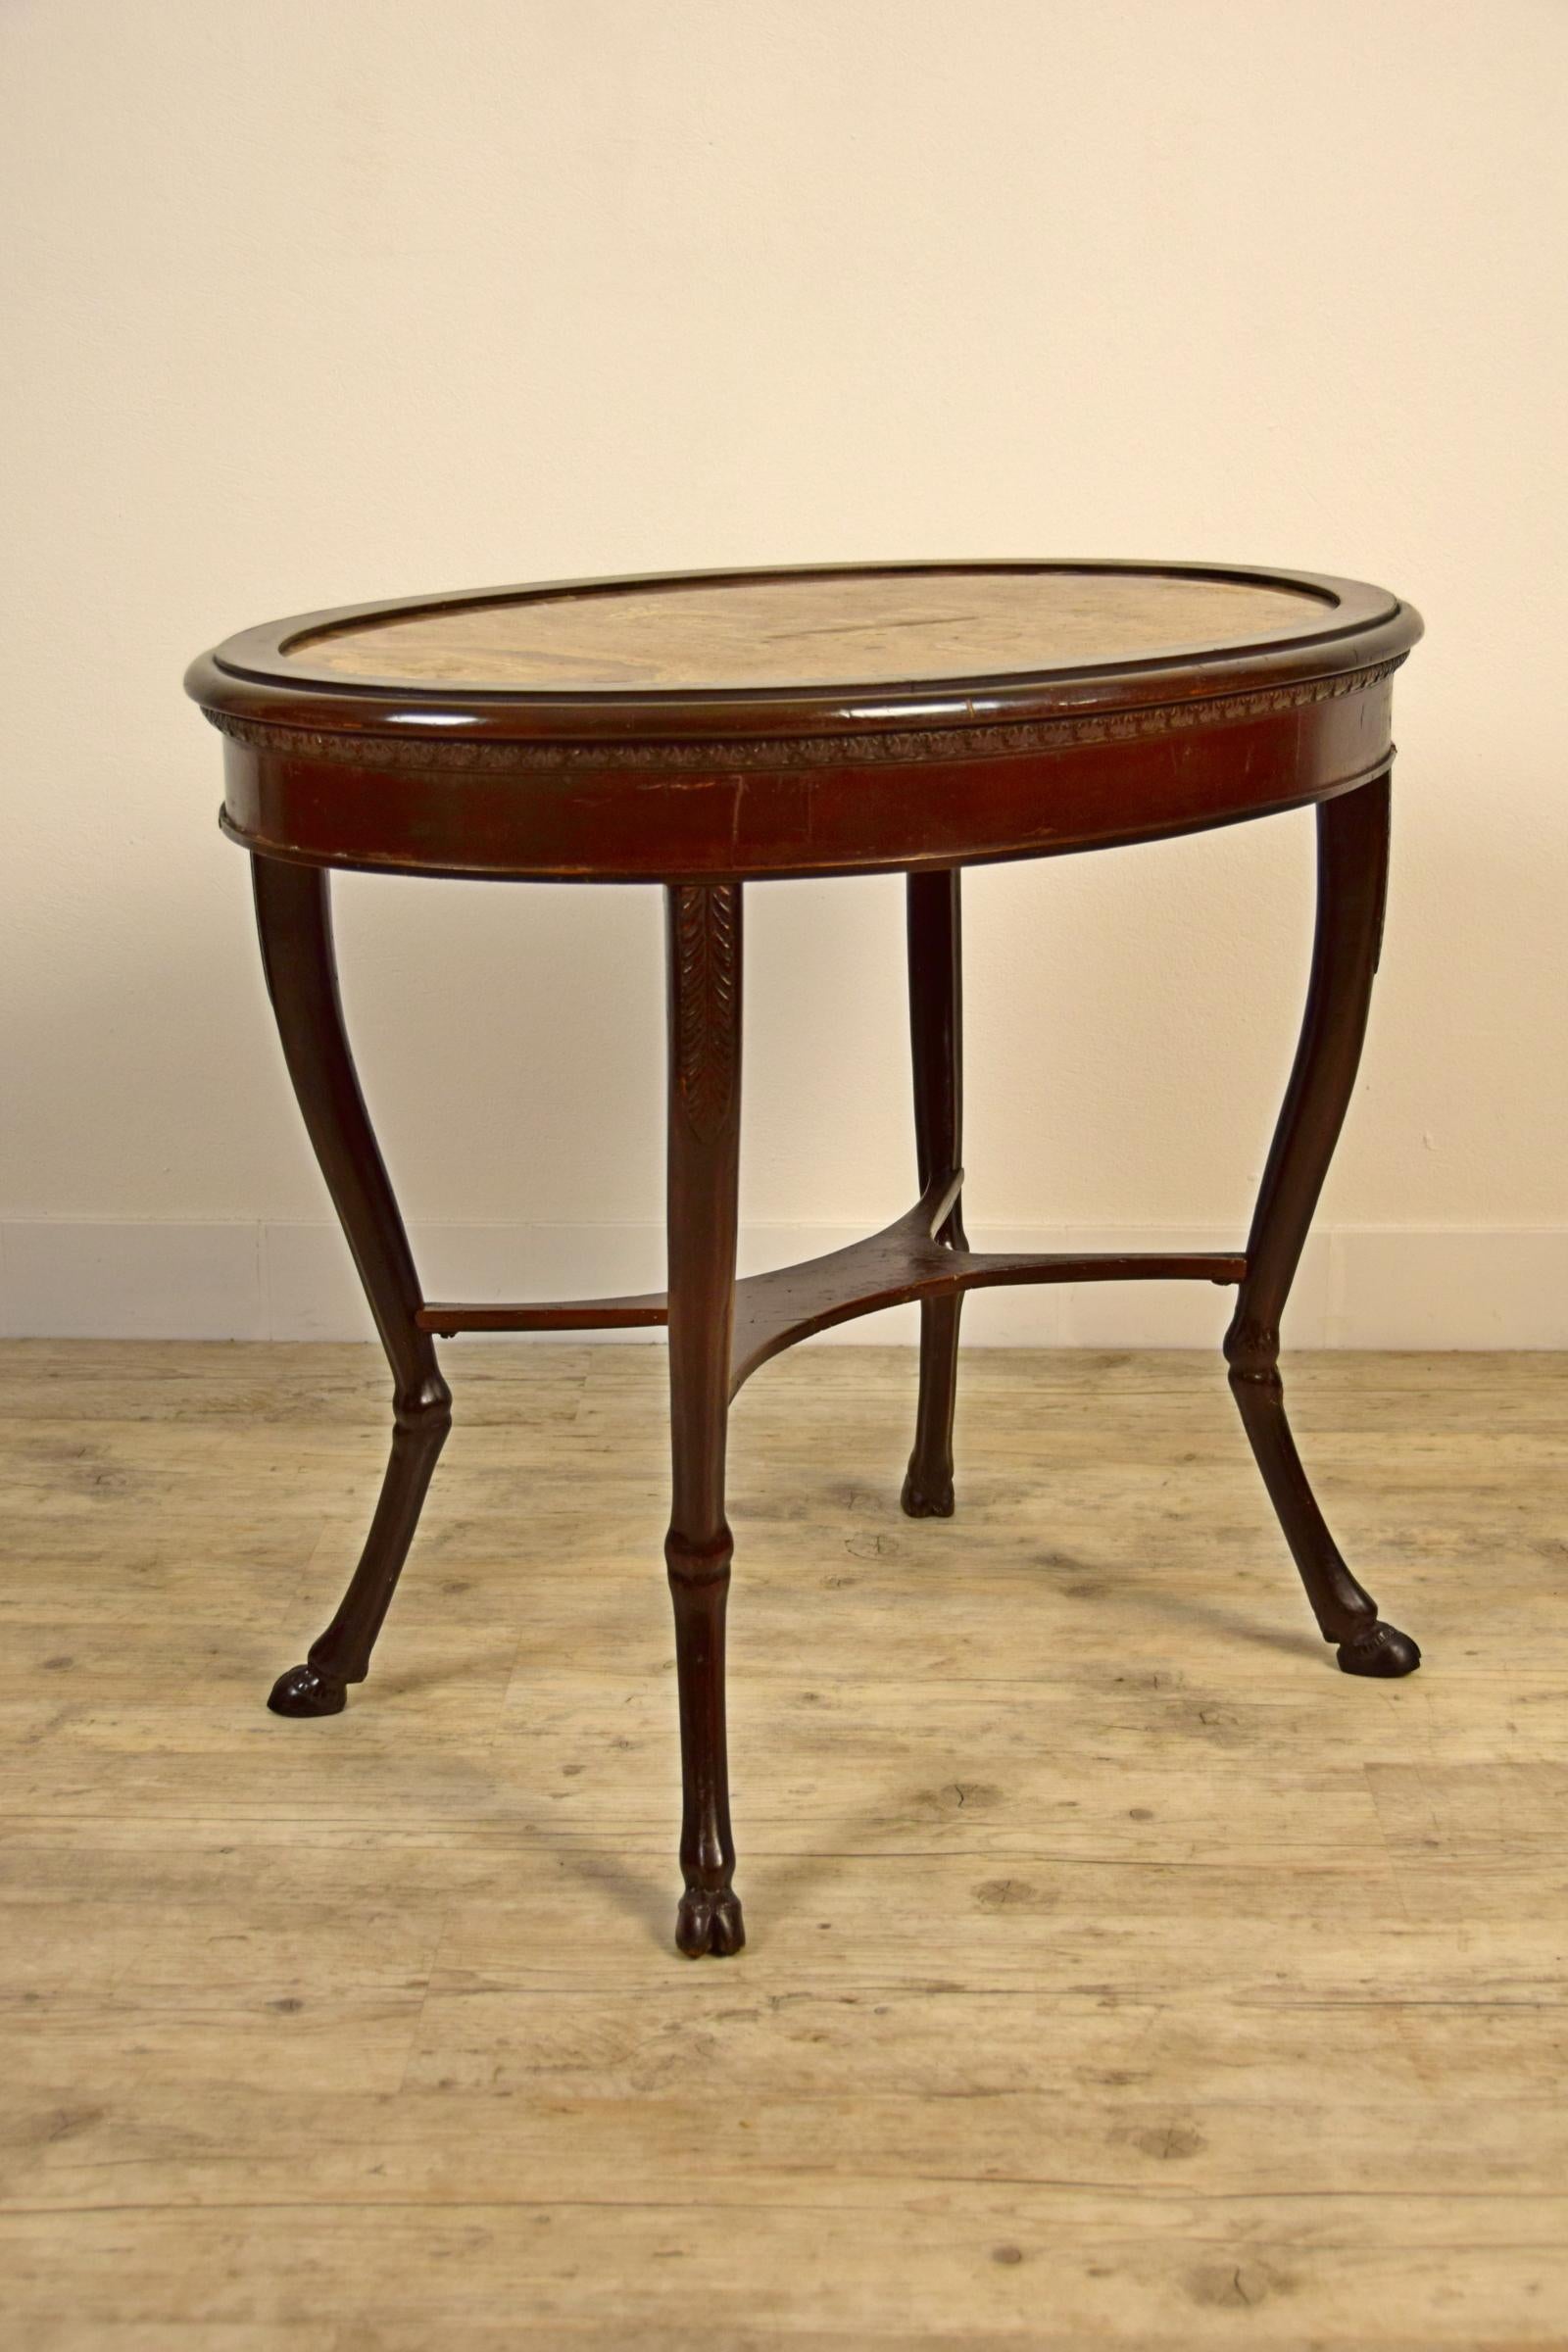 18th Century, Italian Neoclassical Wood Coffee Table with Alabaster Oval Top For Sale 2